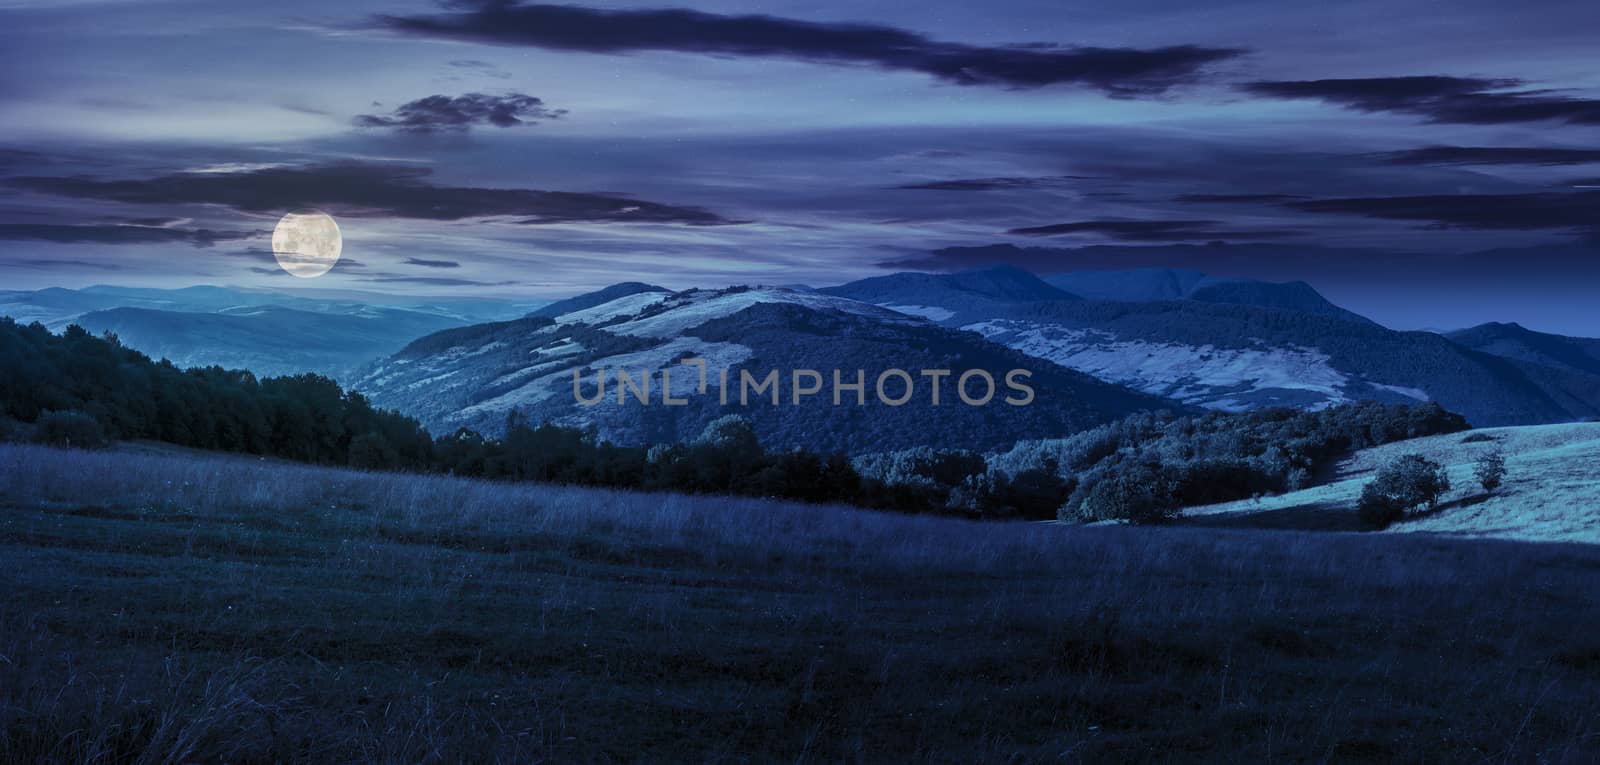 meadow in high mountains at night by Pellinni